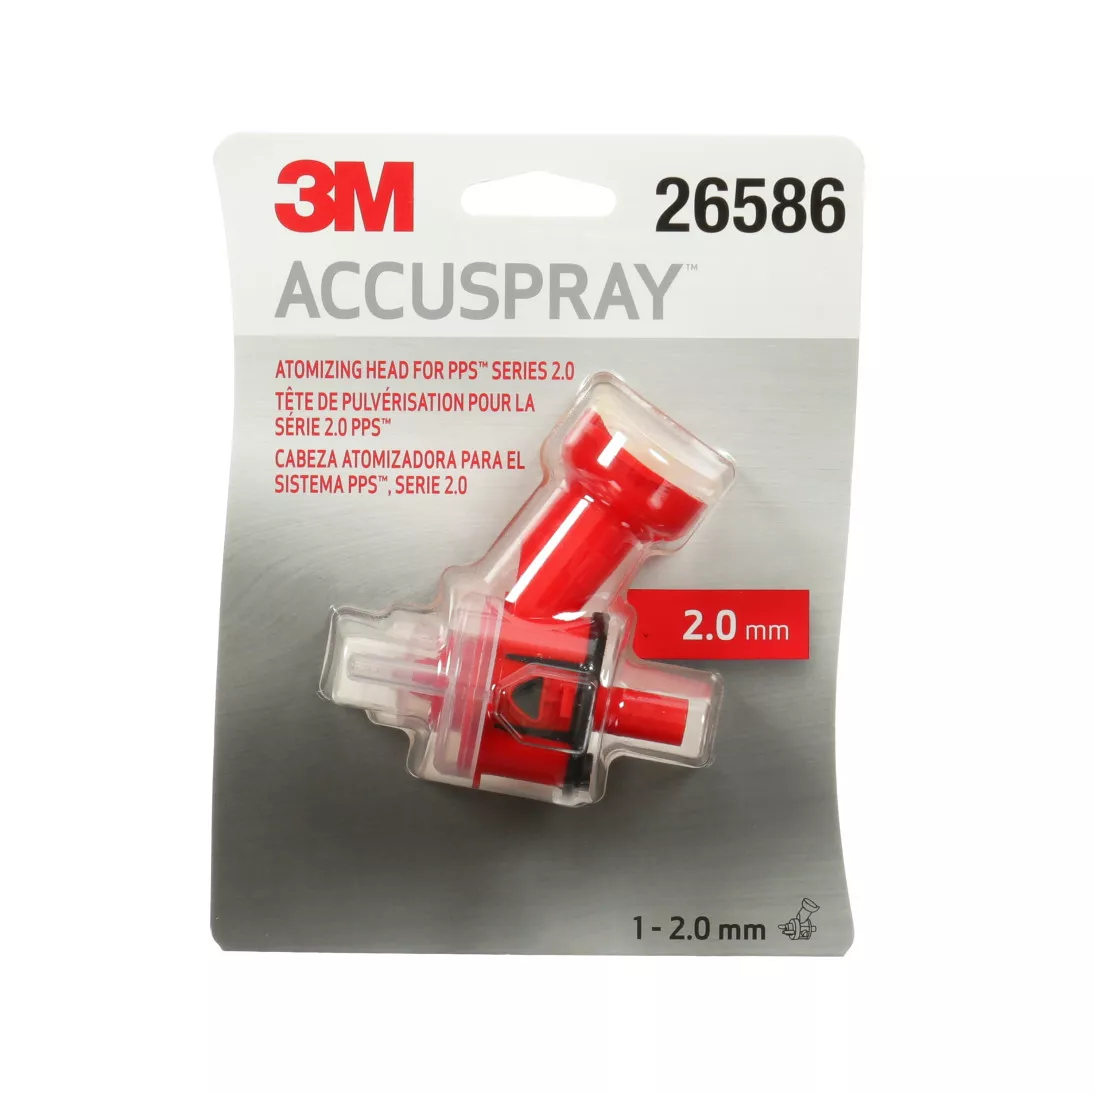 3M™ Accuspray™ Refill Pack for PPS™ Series 2.0, 26586, Red, 2.0 mm, 5
per case